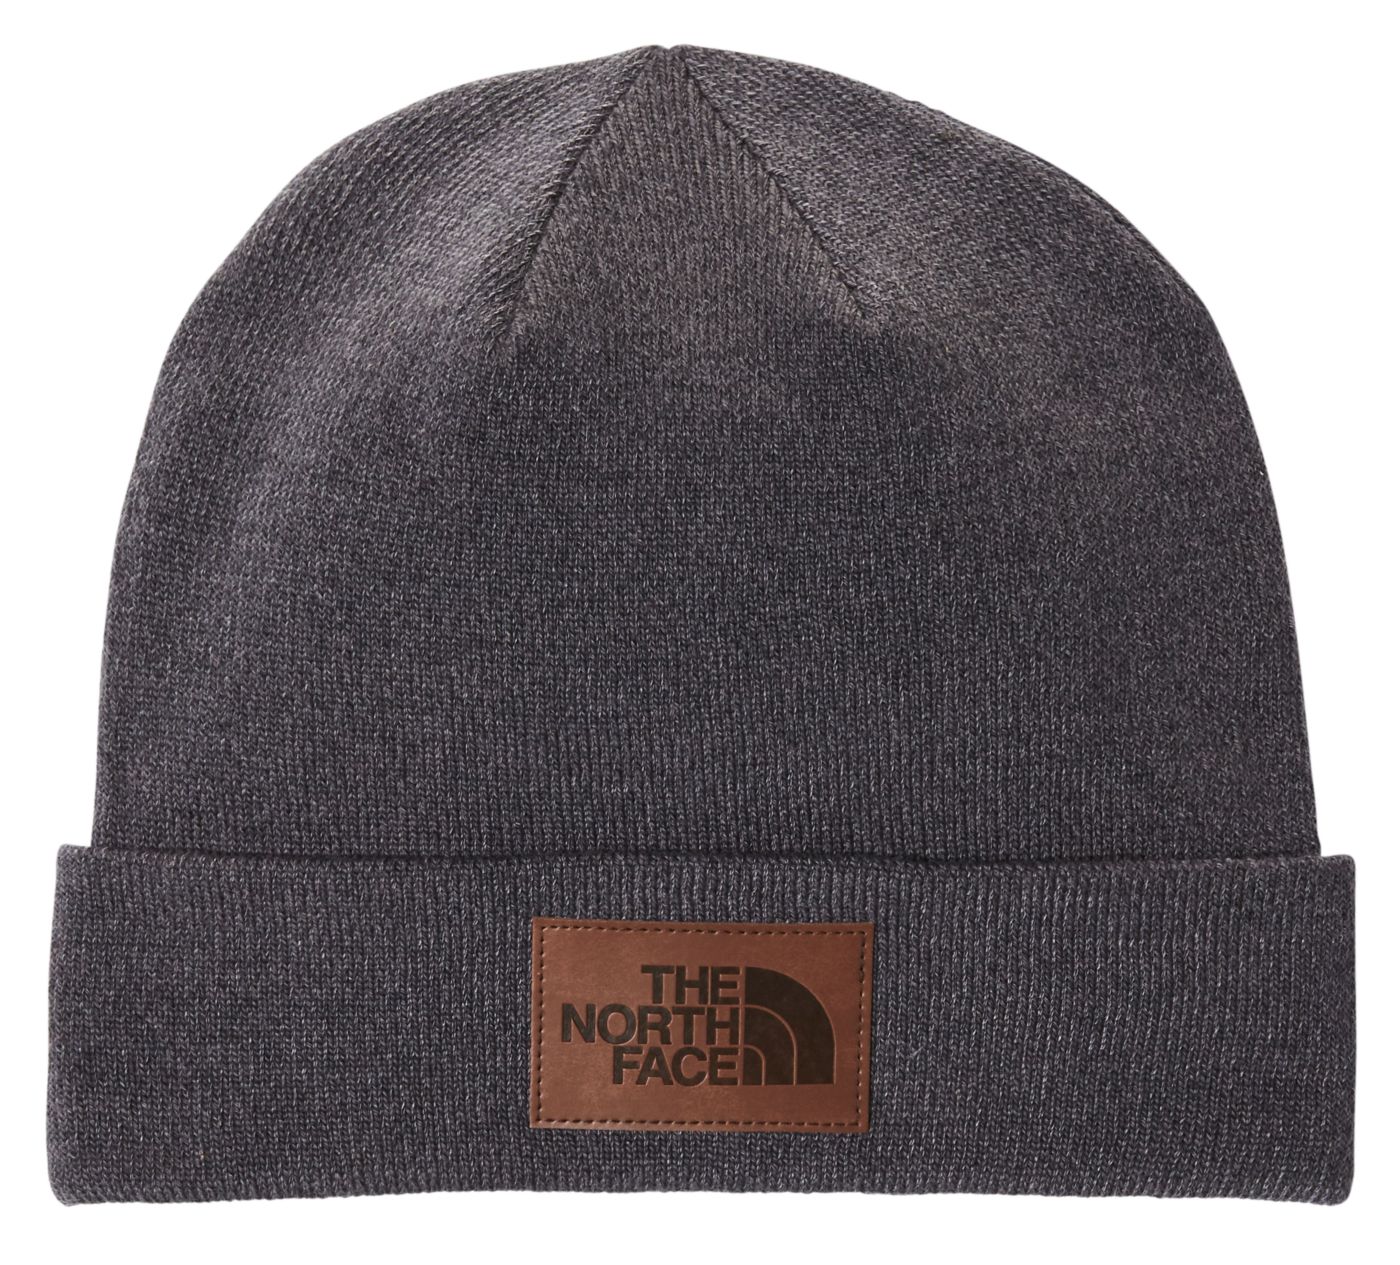 The North Face Men's Leather Dock Worker Recycled Beanie | DICK'S ...